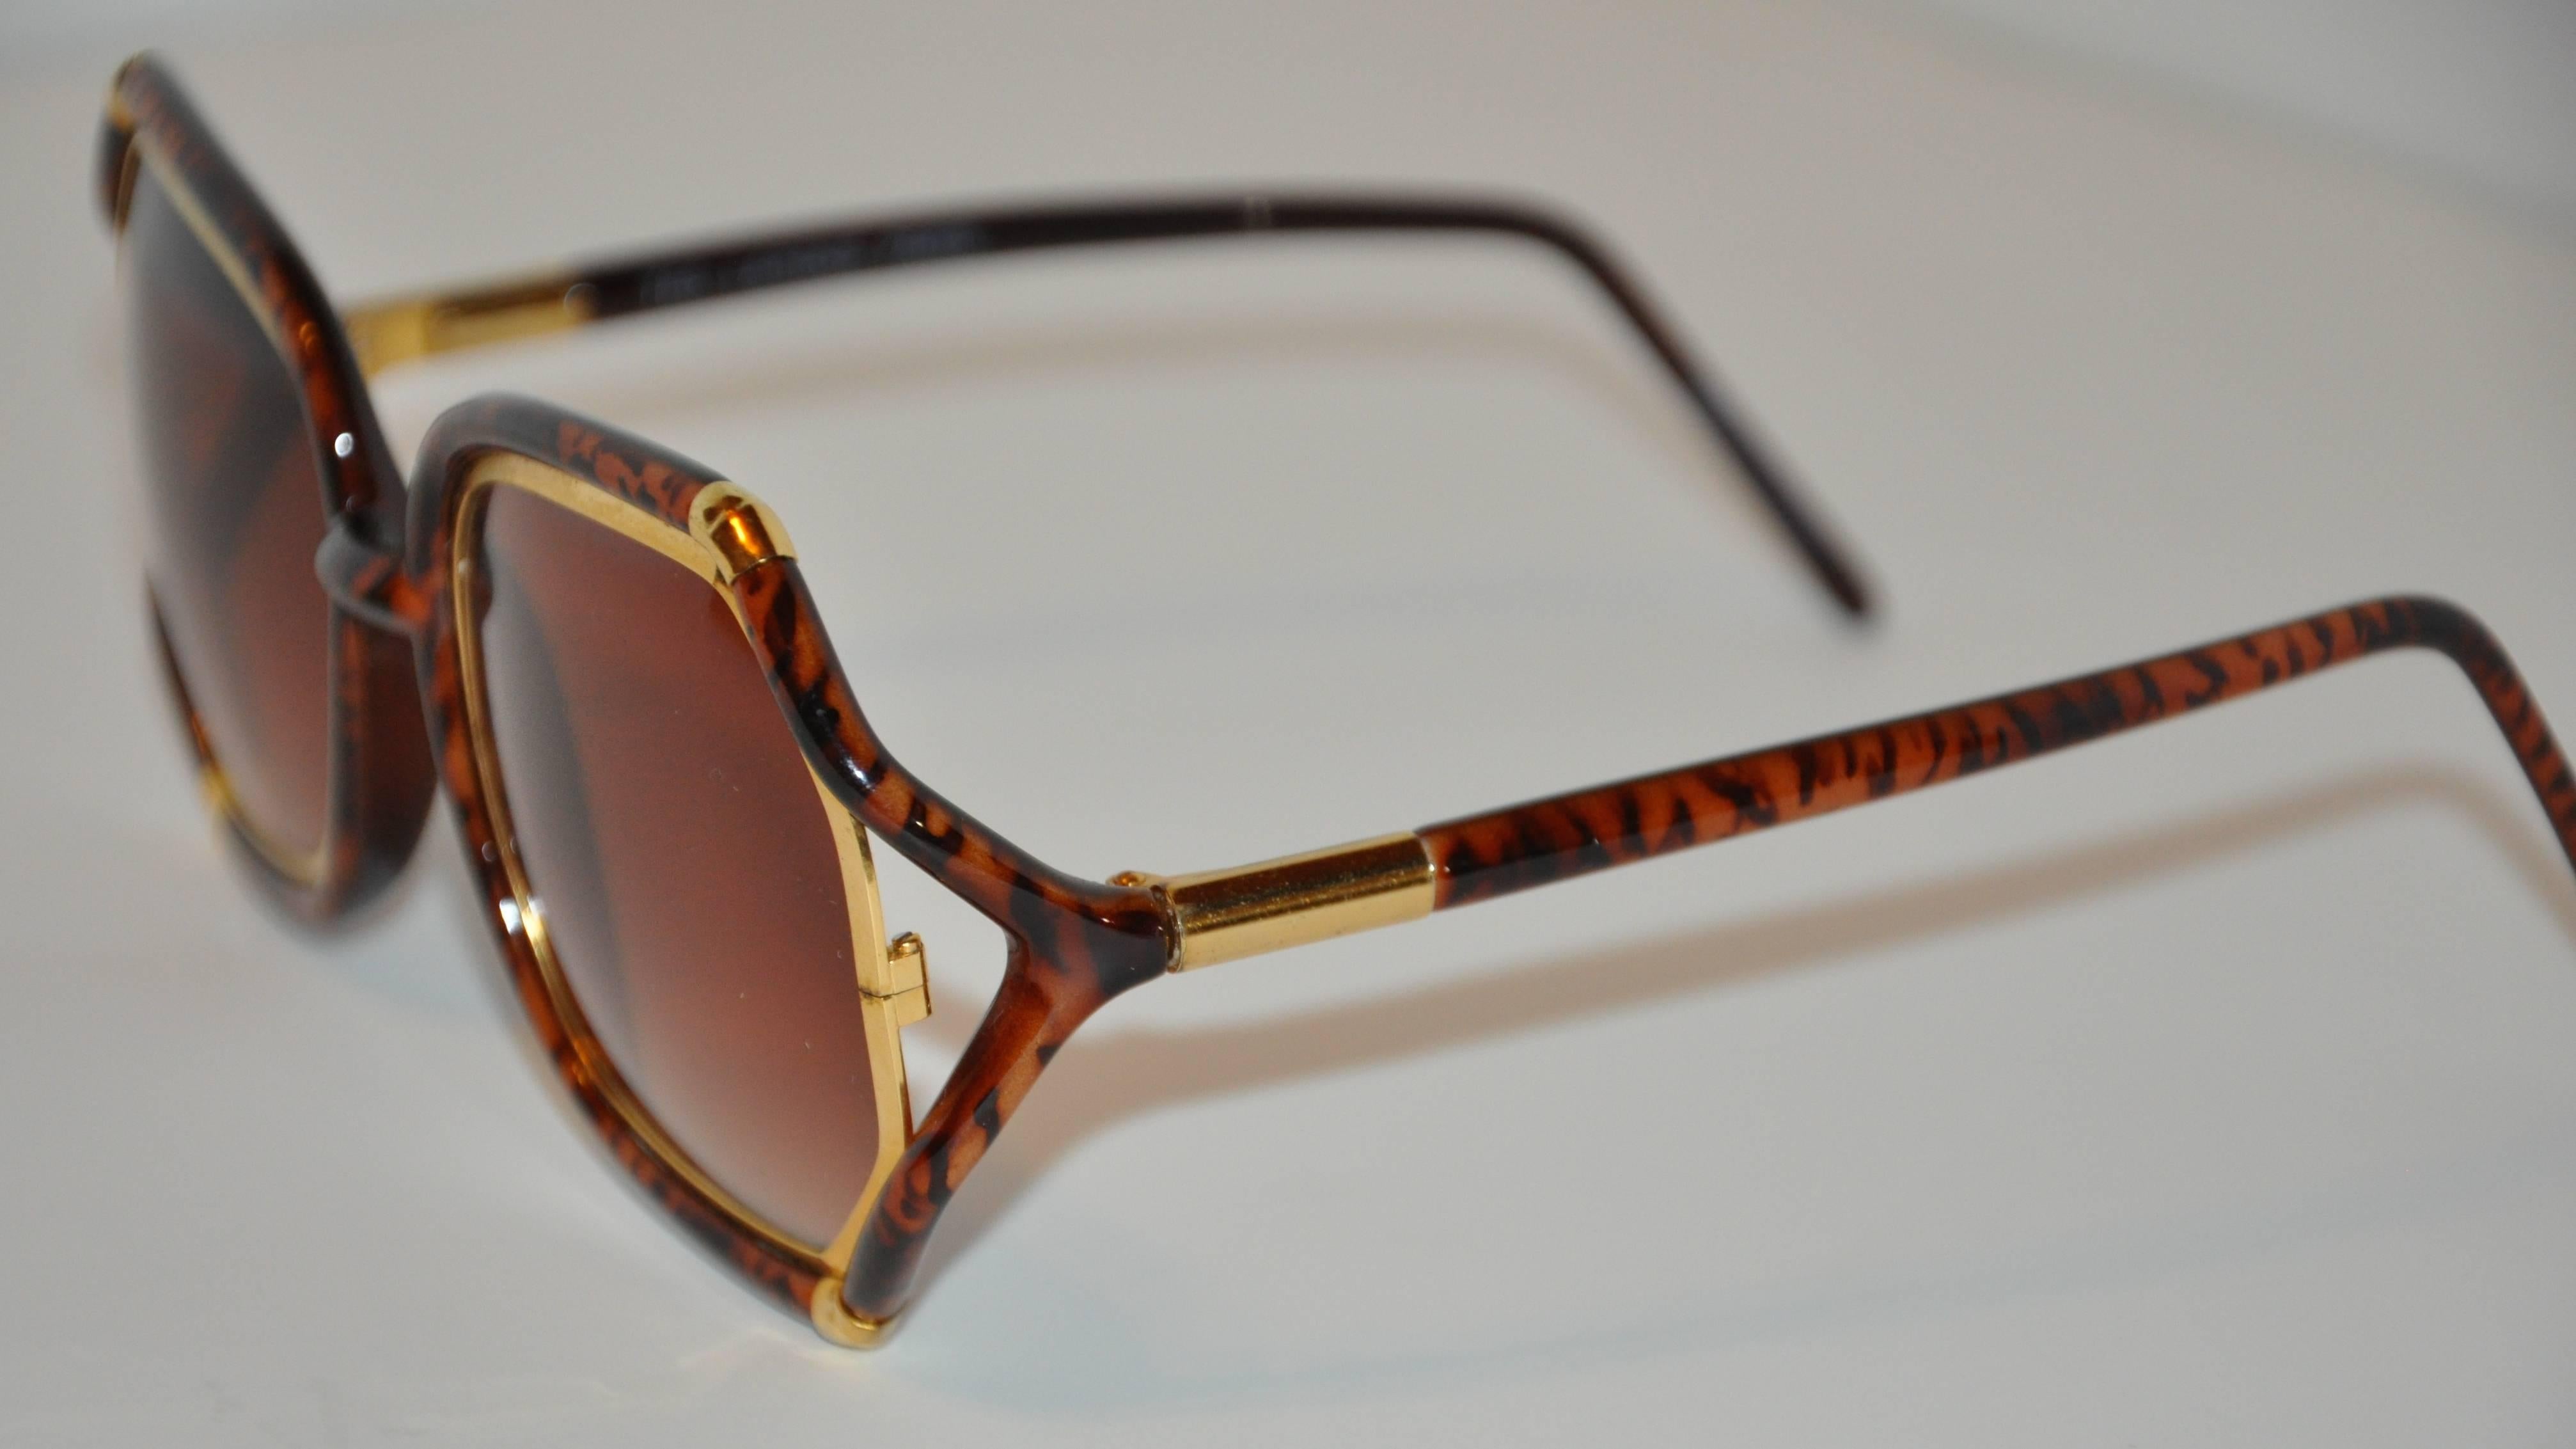         Ted Lapidus wonderfully elegant and vogue thick tortoise shell lucite sunglass are highlighted with gold hardware accent on both the front as well as the arms. The length measures 5 7/8" across the front, height is 2 3/8", arms are